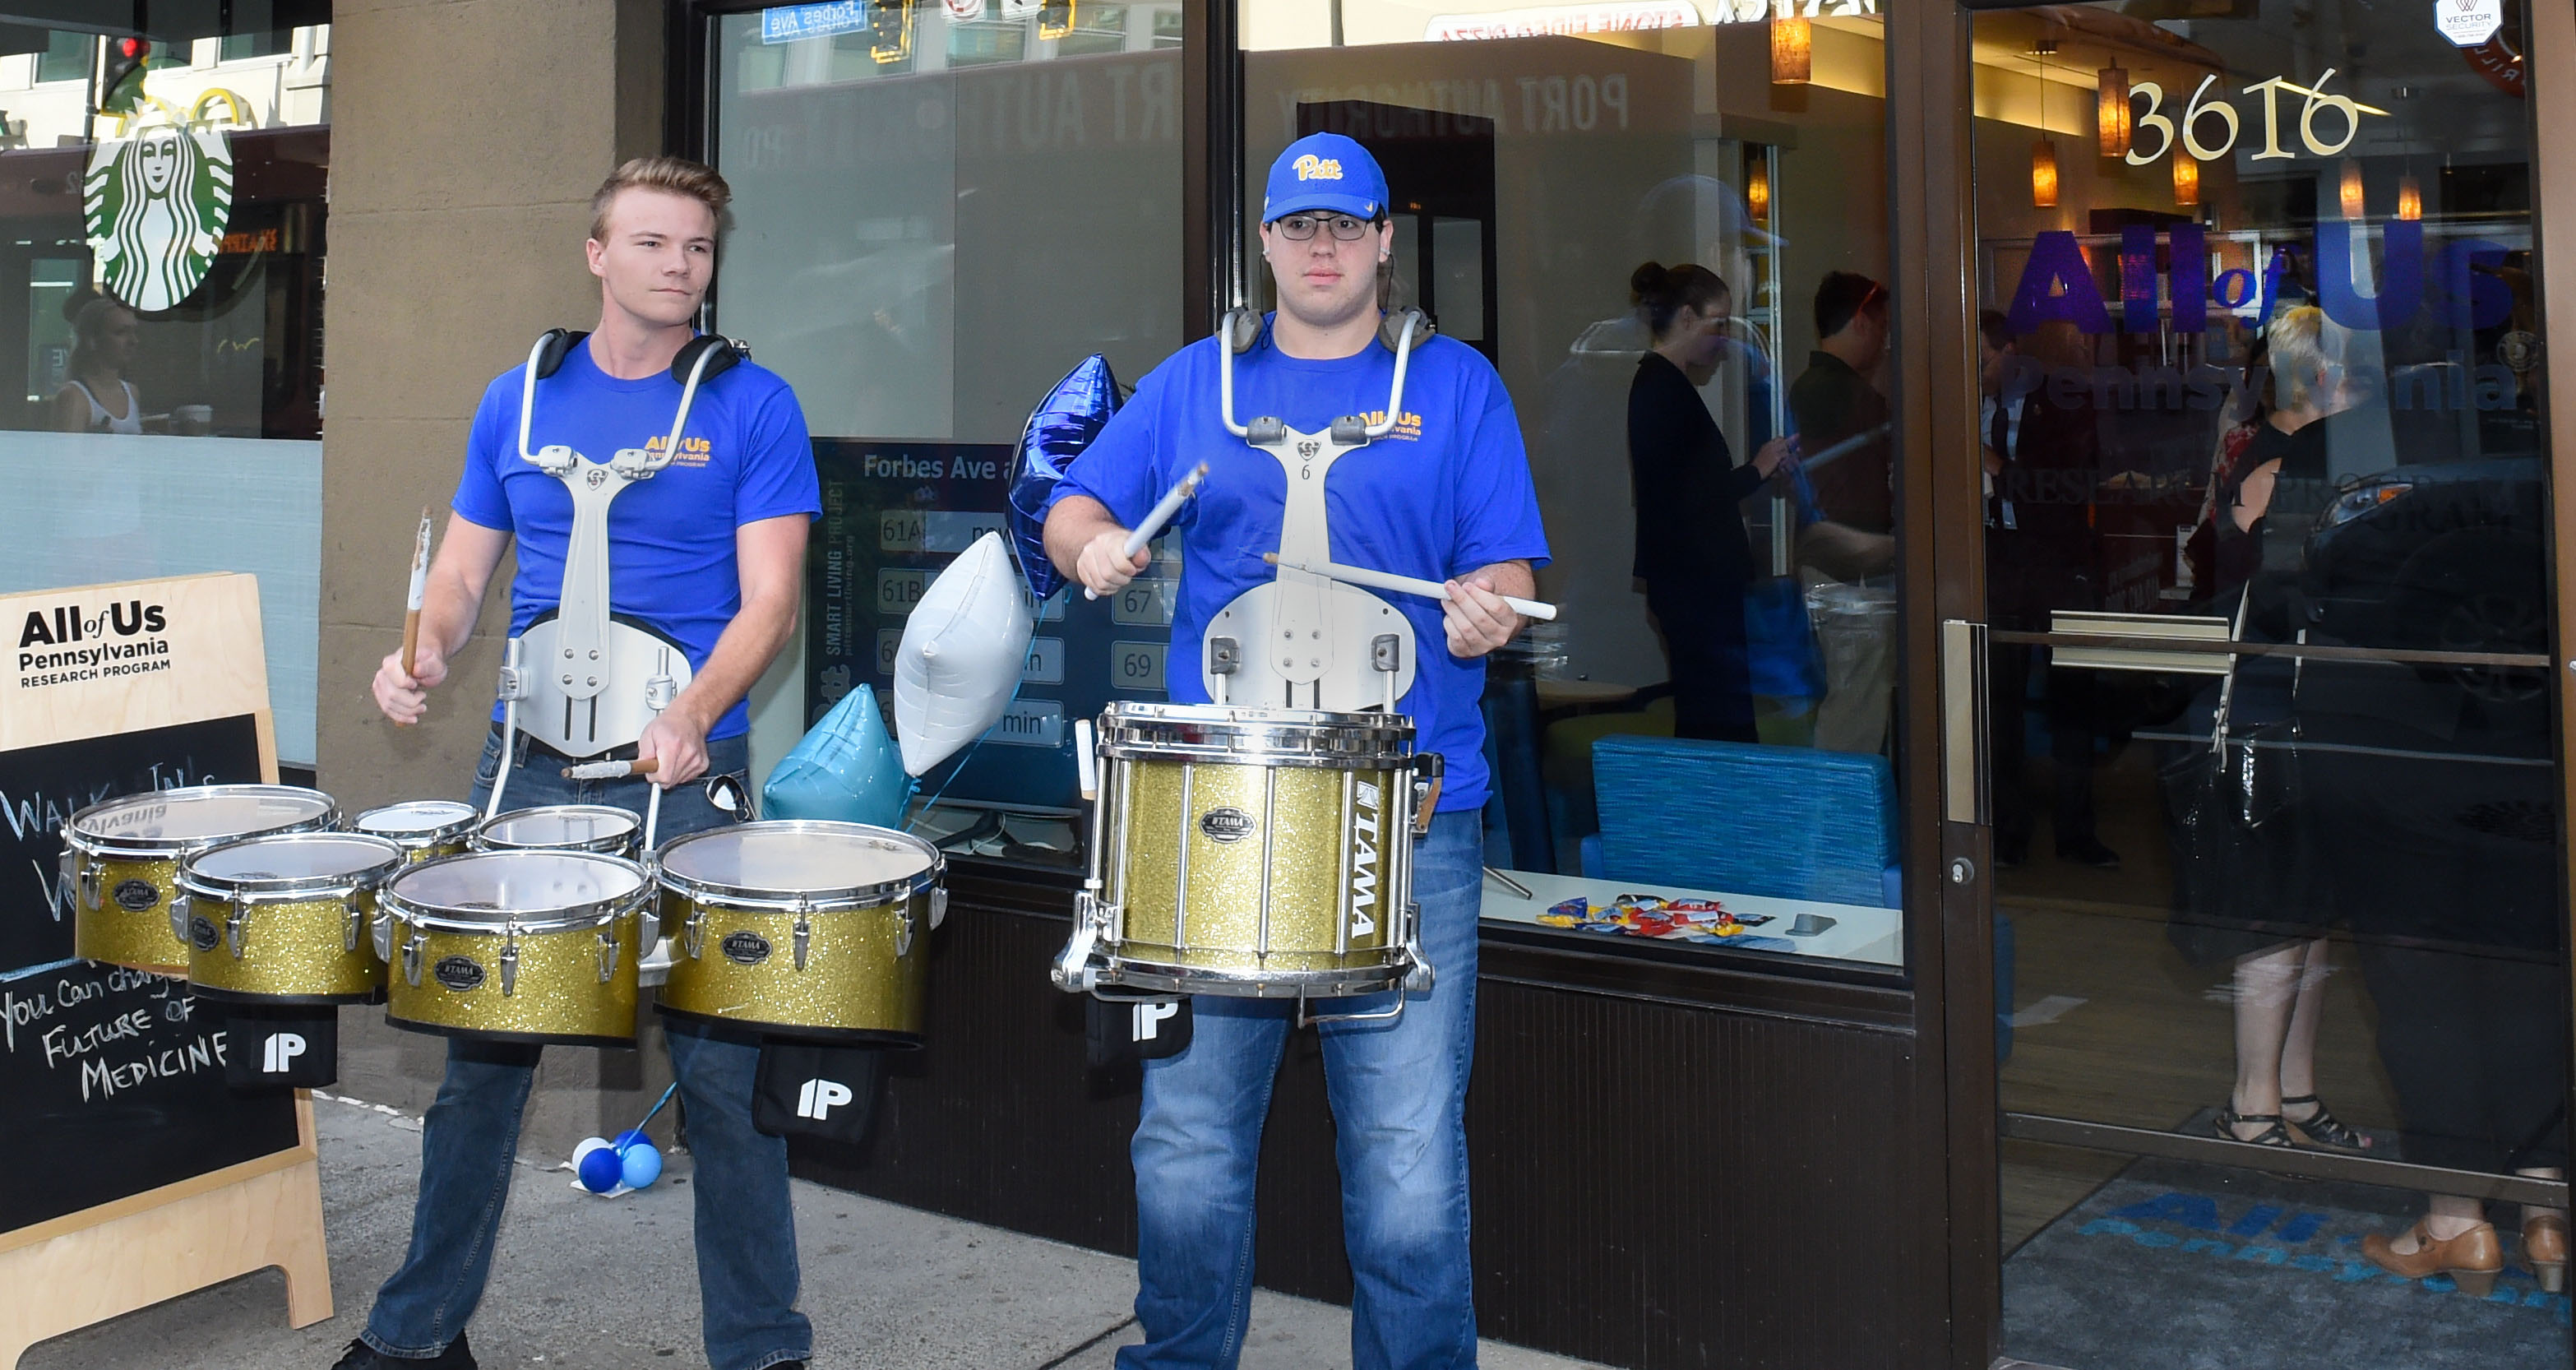 Drummers outside office